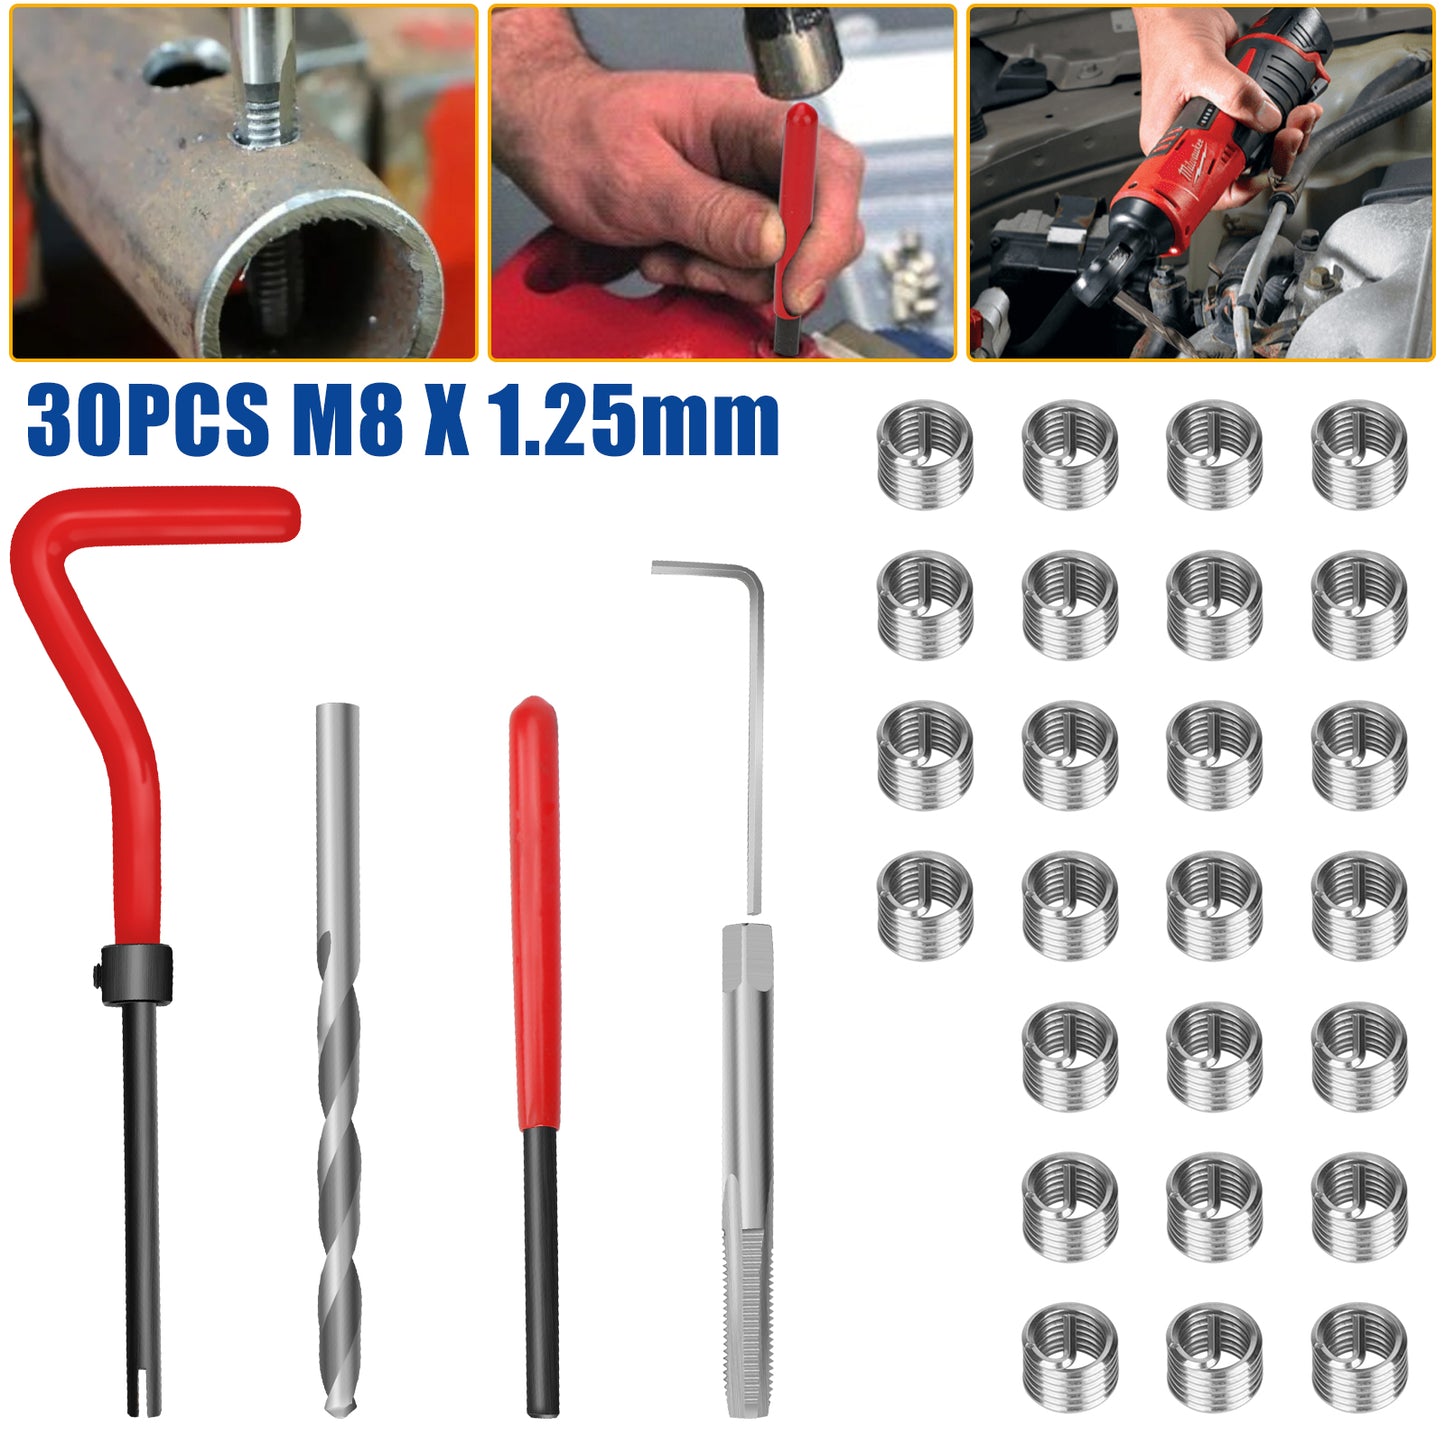 Automotive Thread Repair Kit - All-in-One M8 x 1.25mm Thread Inserts, Tap, Drill Bit, Installation Tool, and More